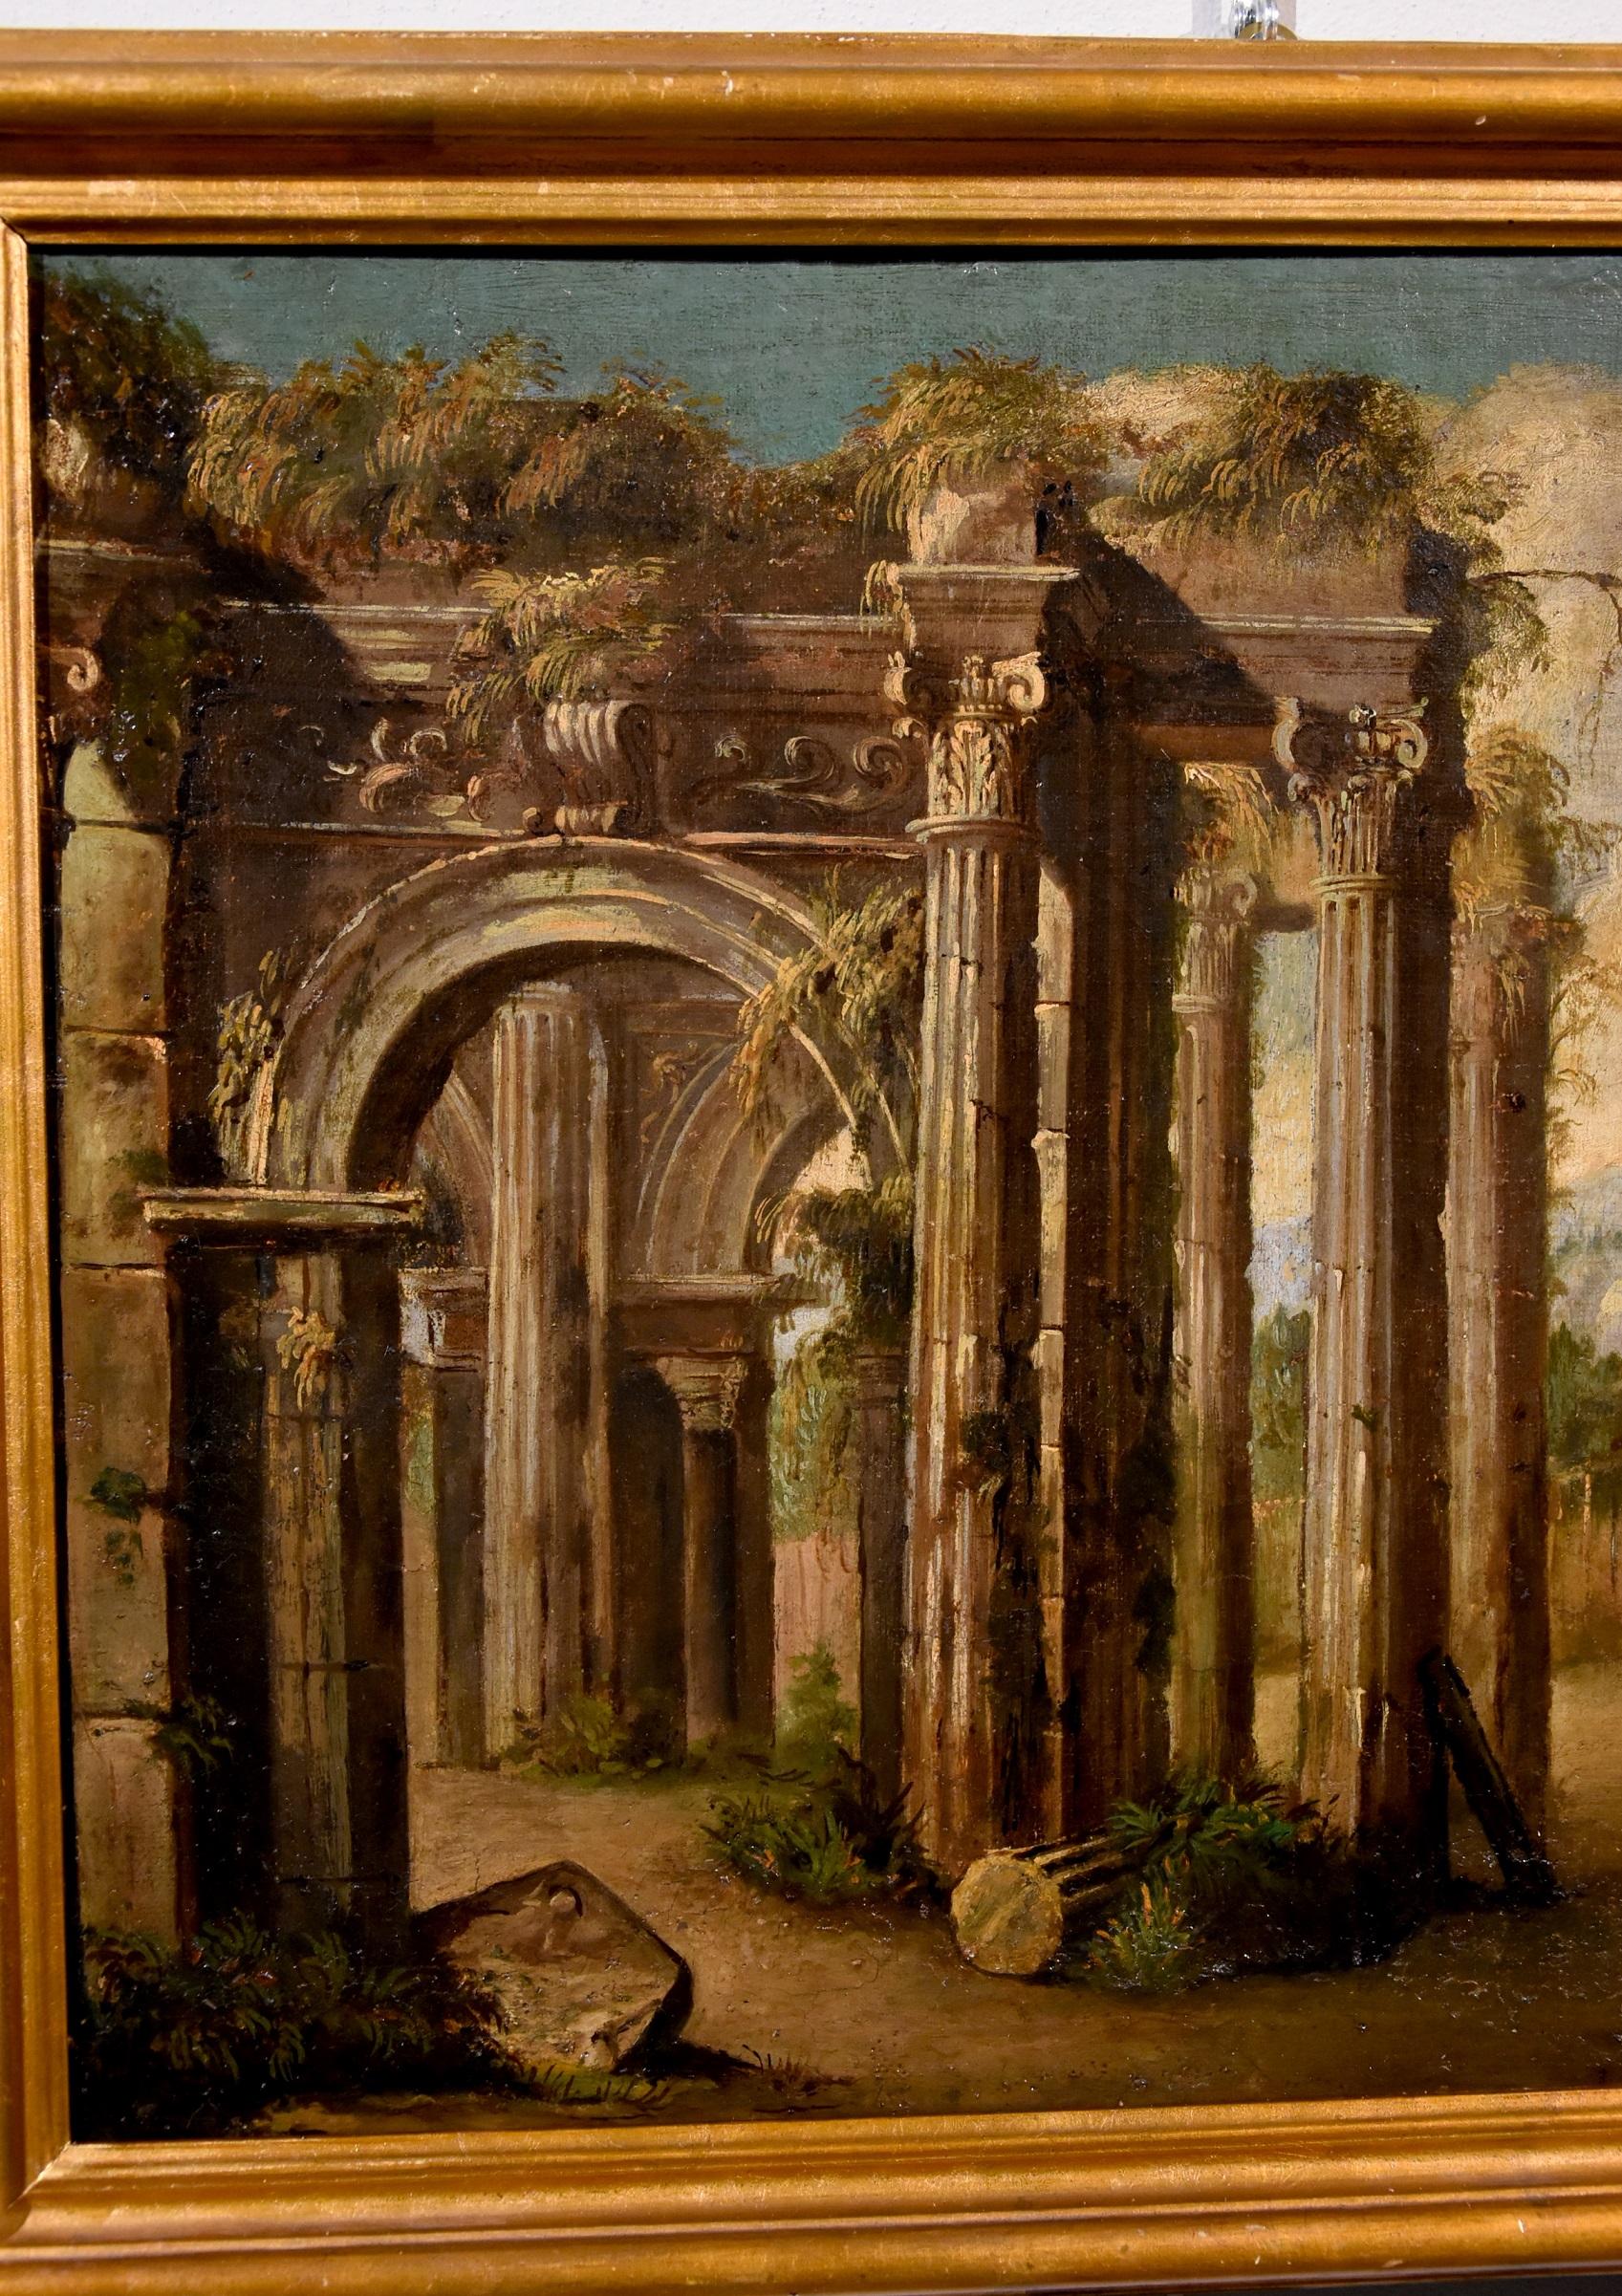 Roman school late 17th - early 18th century - Follower of Niccolò Codazzi (Naples, 1642 - Genoa, 1693)
Pair of fantastic architectural whims with classical ruins and figures

Oils on canvas, cm. 47 x 60, framed cm. 55 x 68

A suggestive perspective